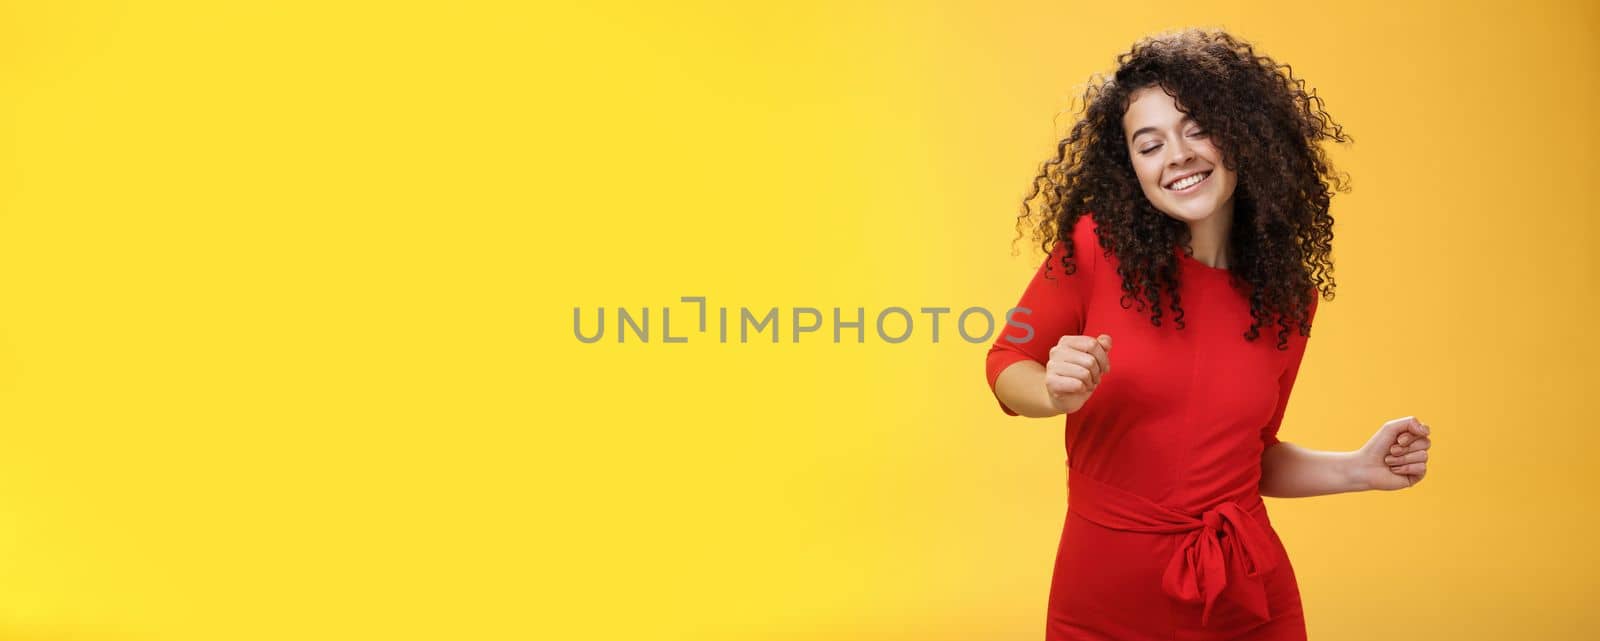 Carefree woman dancing on dance floor with close eyes and smile enjoying life feeling happy and joyful close eyes and making tender expression as moving to rhythm of music over yellow background. People, lifestyle and emotions concept